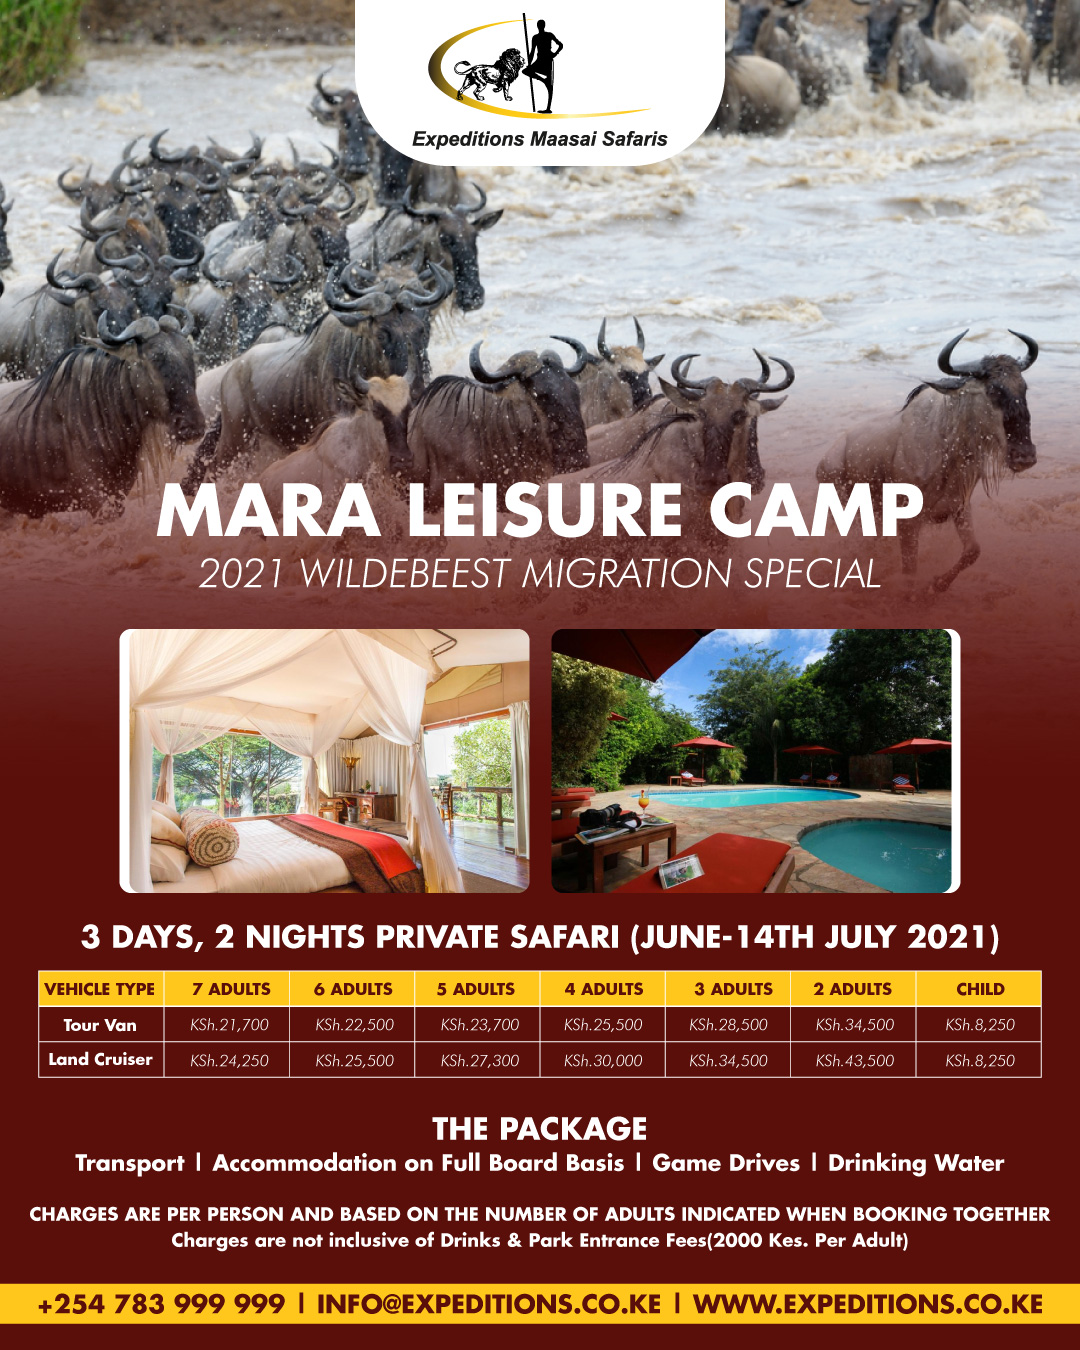 Enjoy the best rates for early wildebeest migration at the Mara Leisure Camp, Talek Maasai Mara